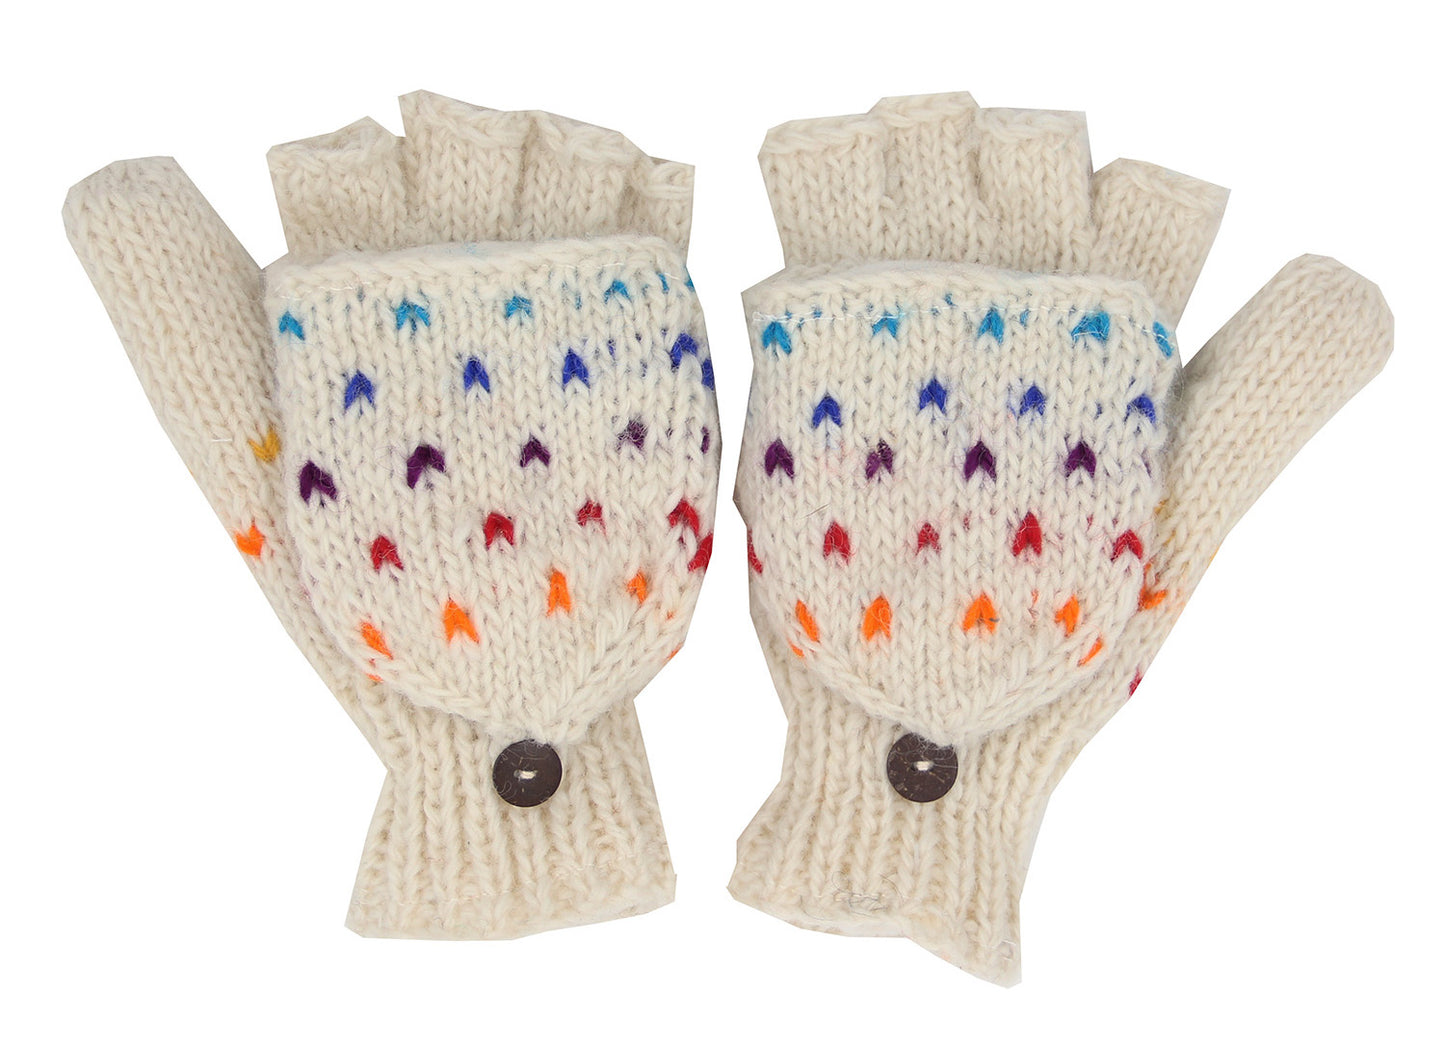 Hand Knit 100% Wool Convertible Finger less Mittens Glove Nepal - DharmaObjects